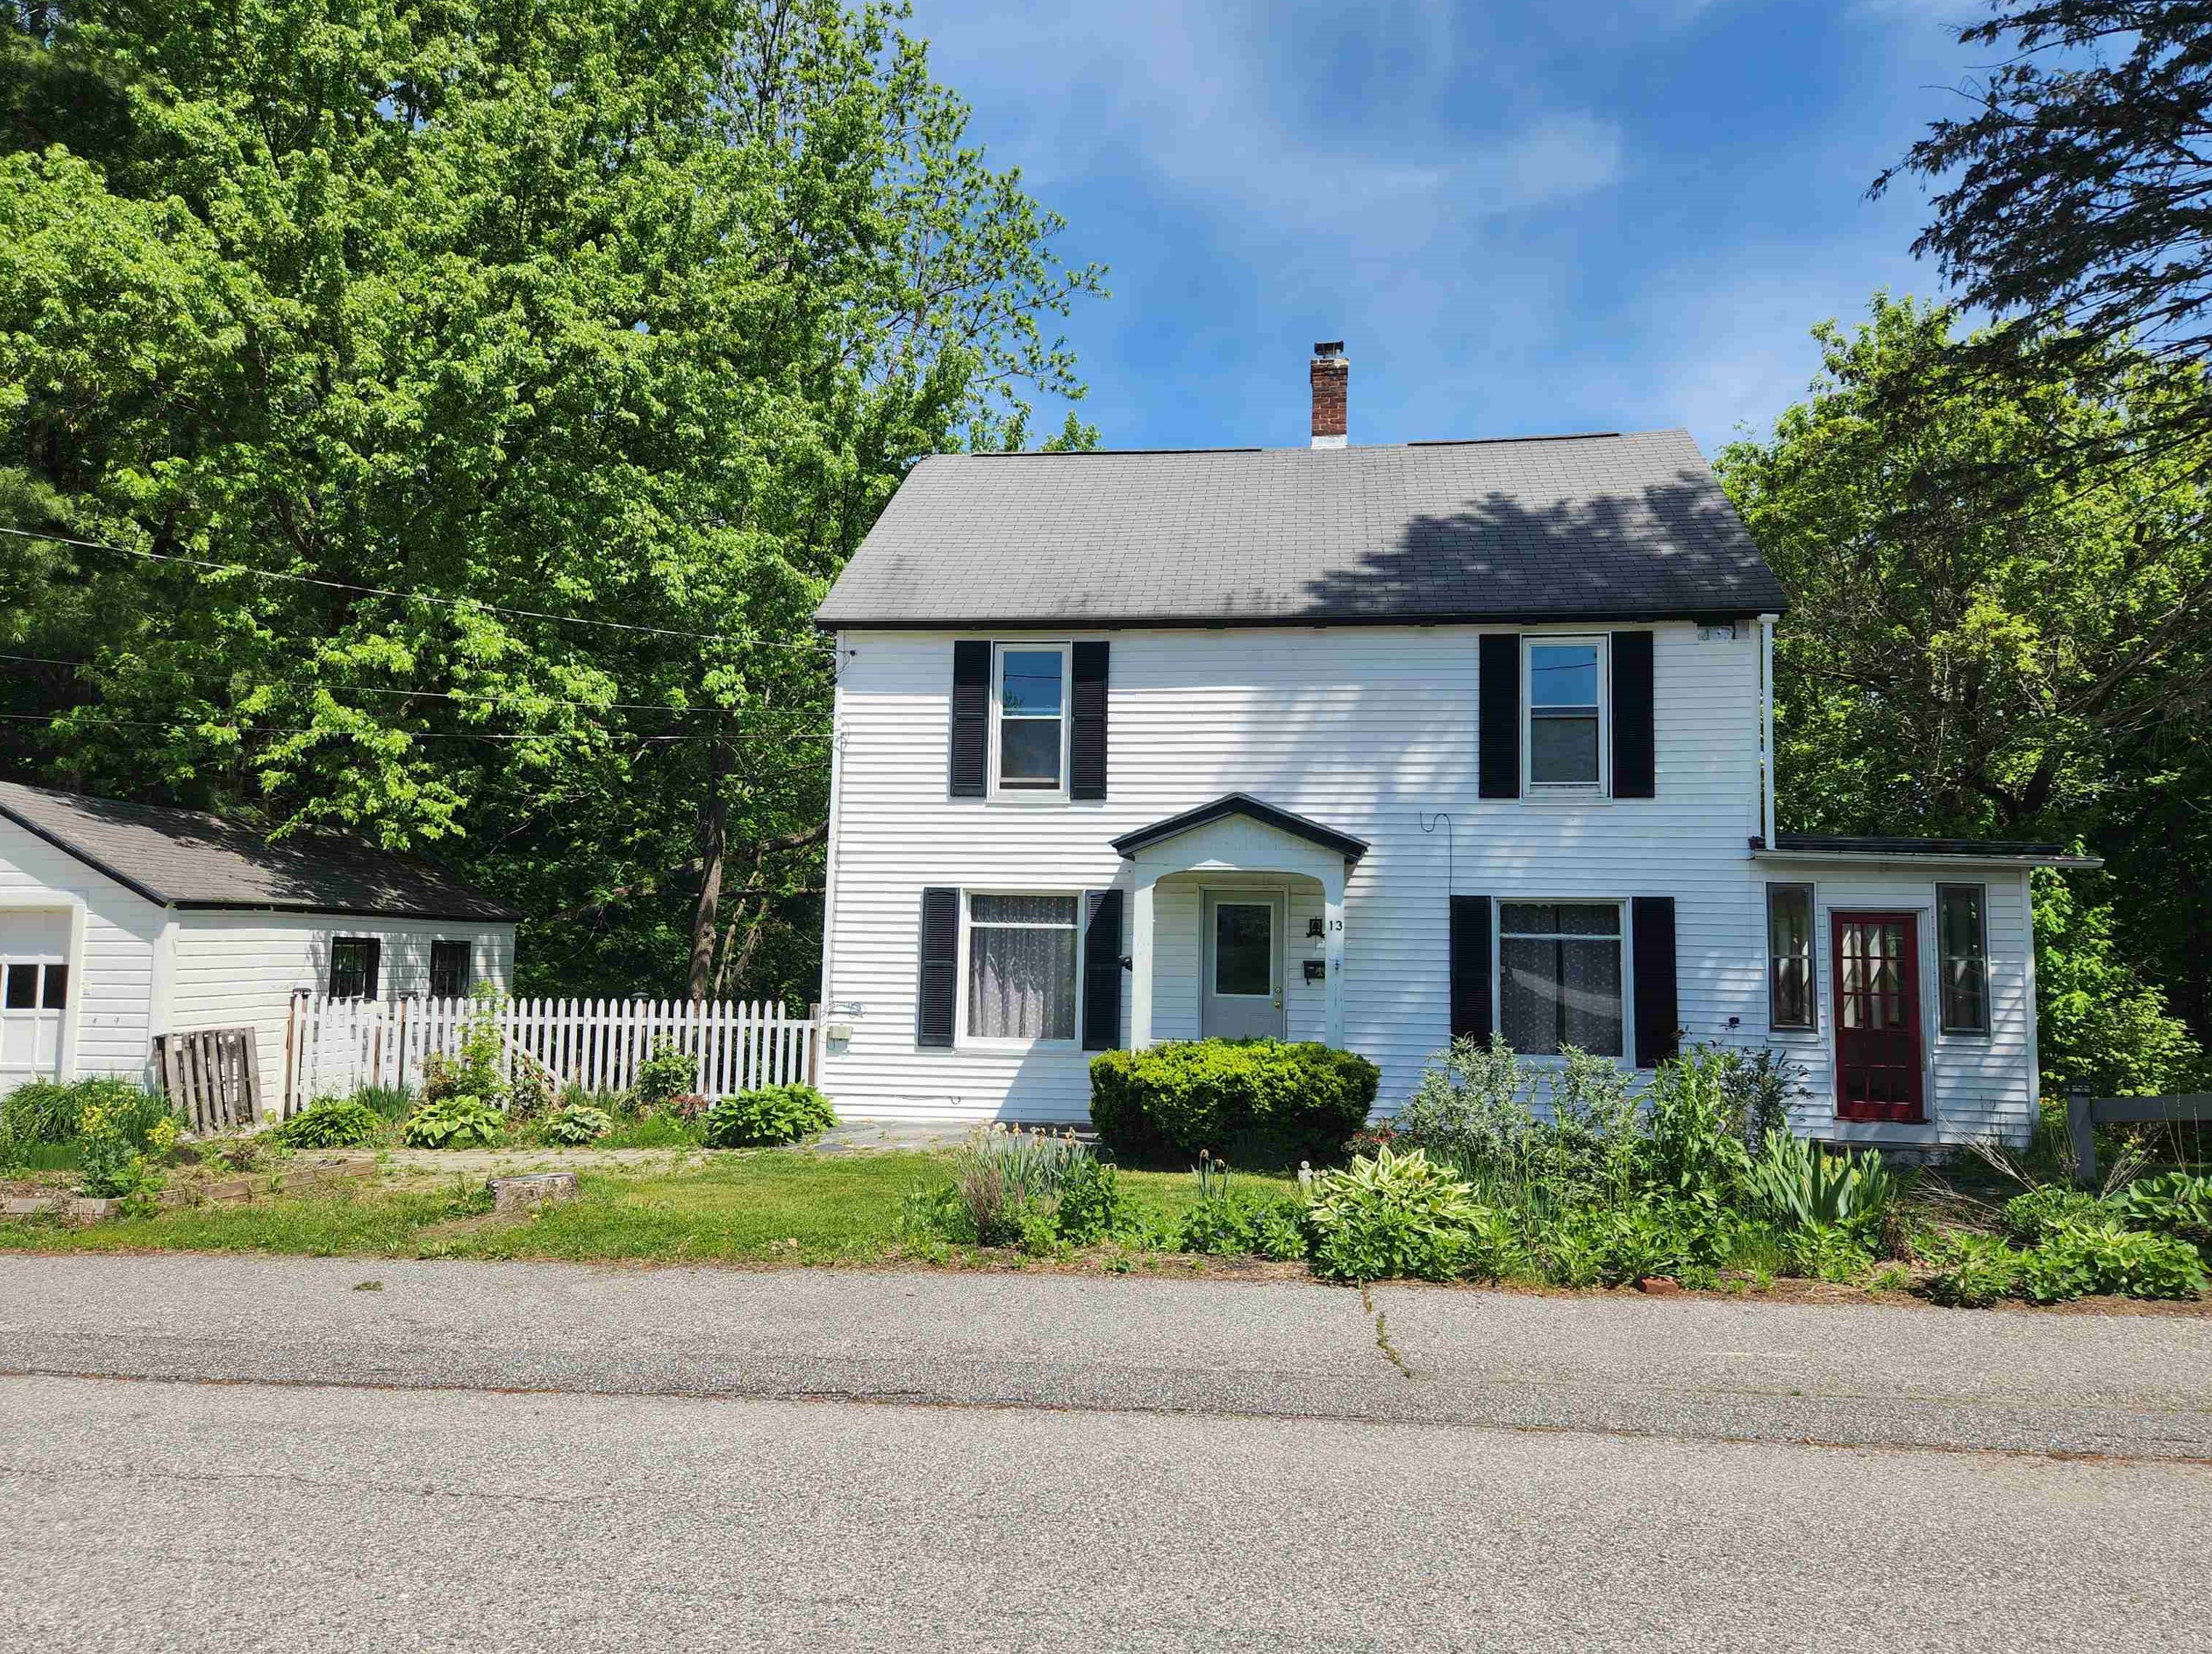 13 Curtis St, Unity, NH 03743